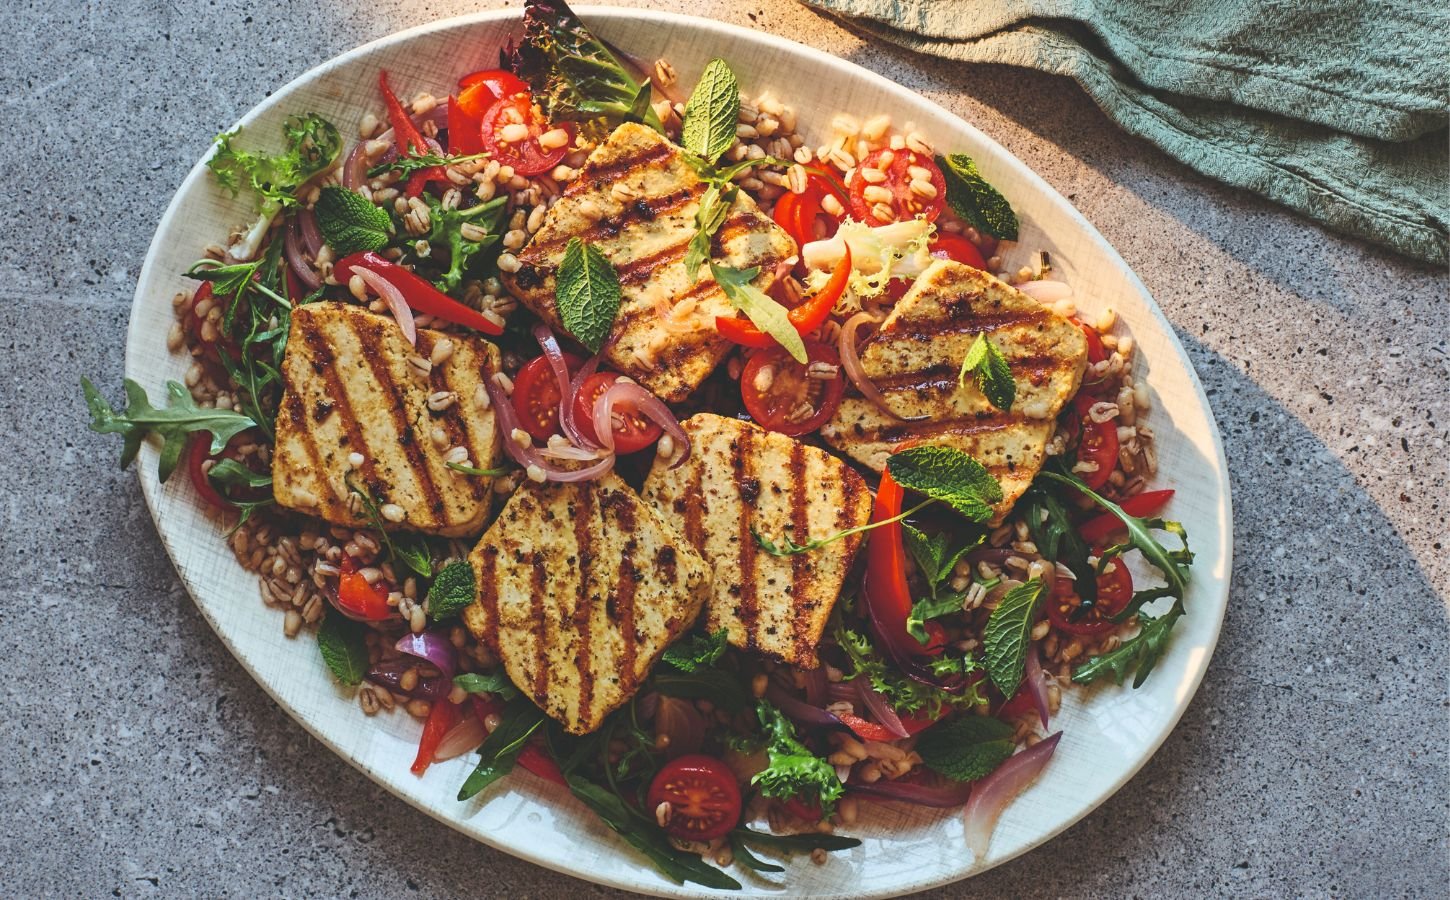 A vegan and dairy-free halloumi salad recipe from plant-based chefs BOSH!